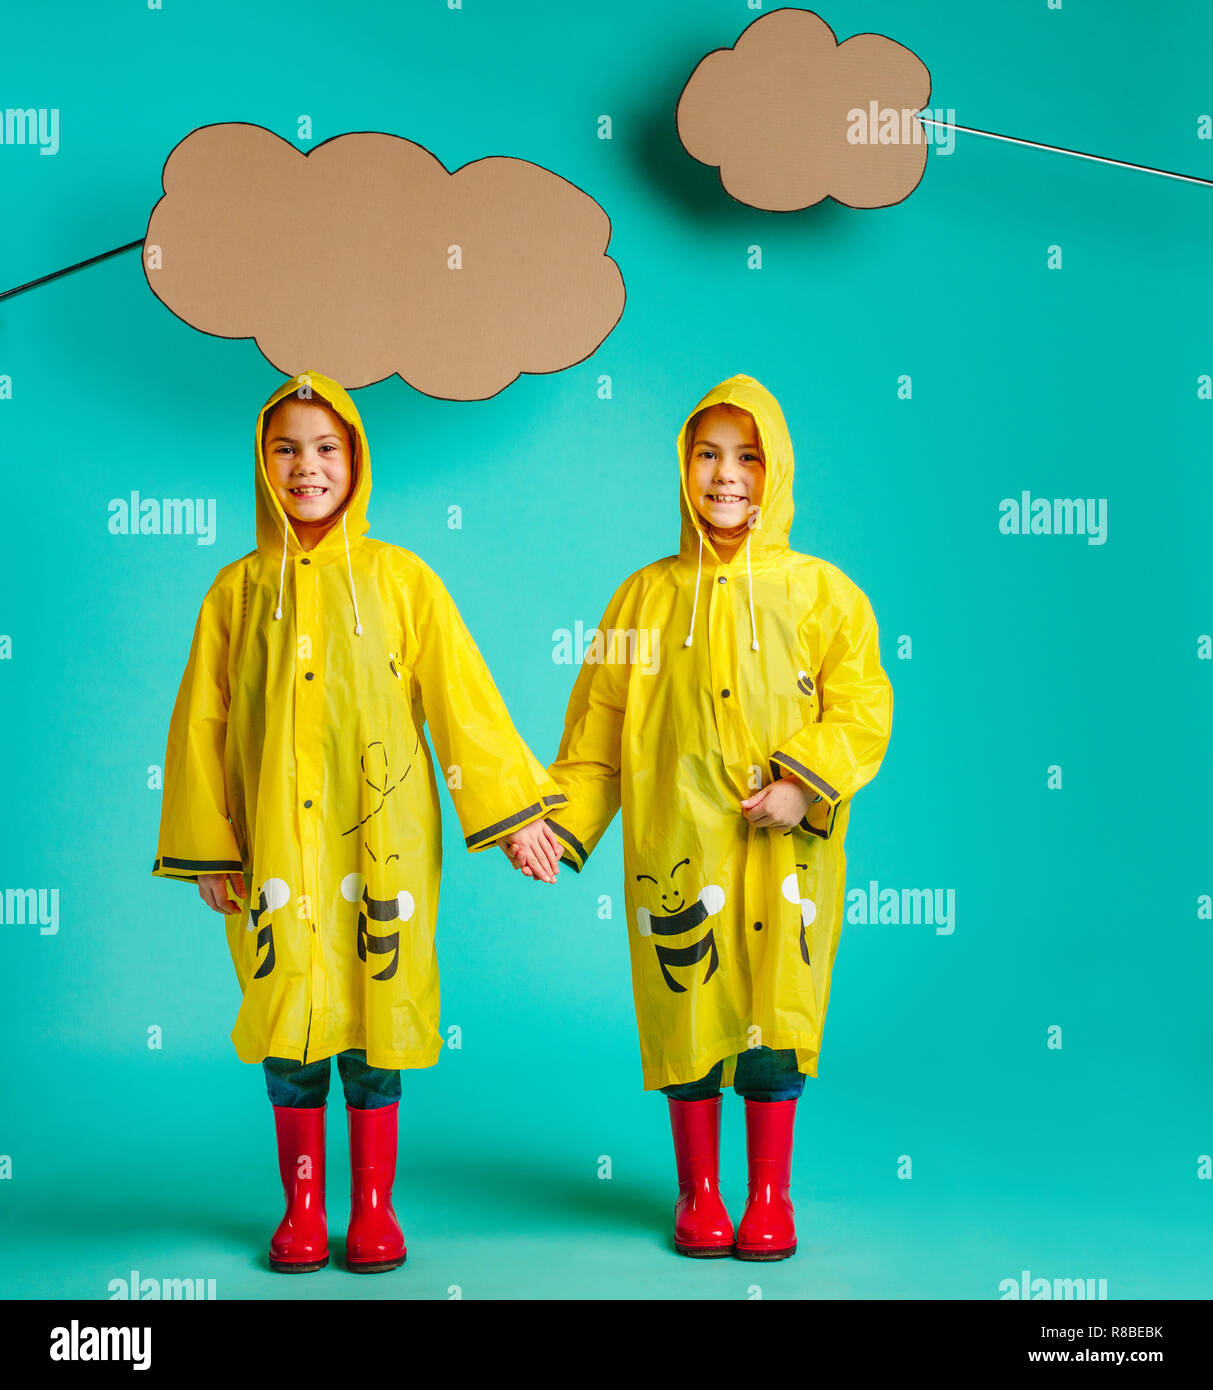 Happy twins girls wearing raincoat standing together holding hands under paper clouds. Small girls in rainwear standing on blue background. Stock Photo